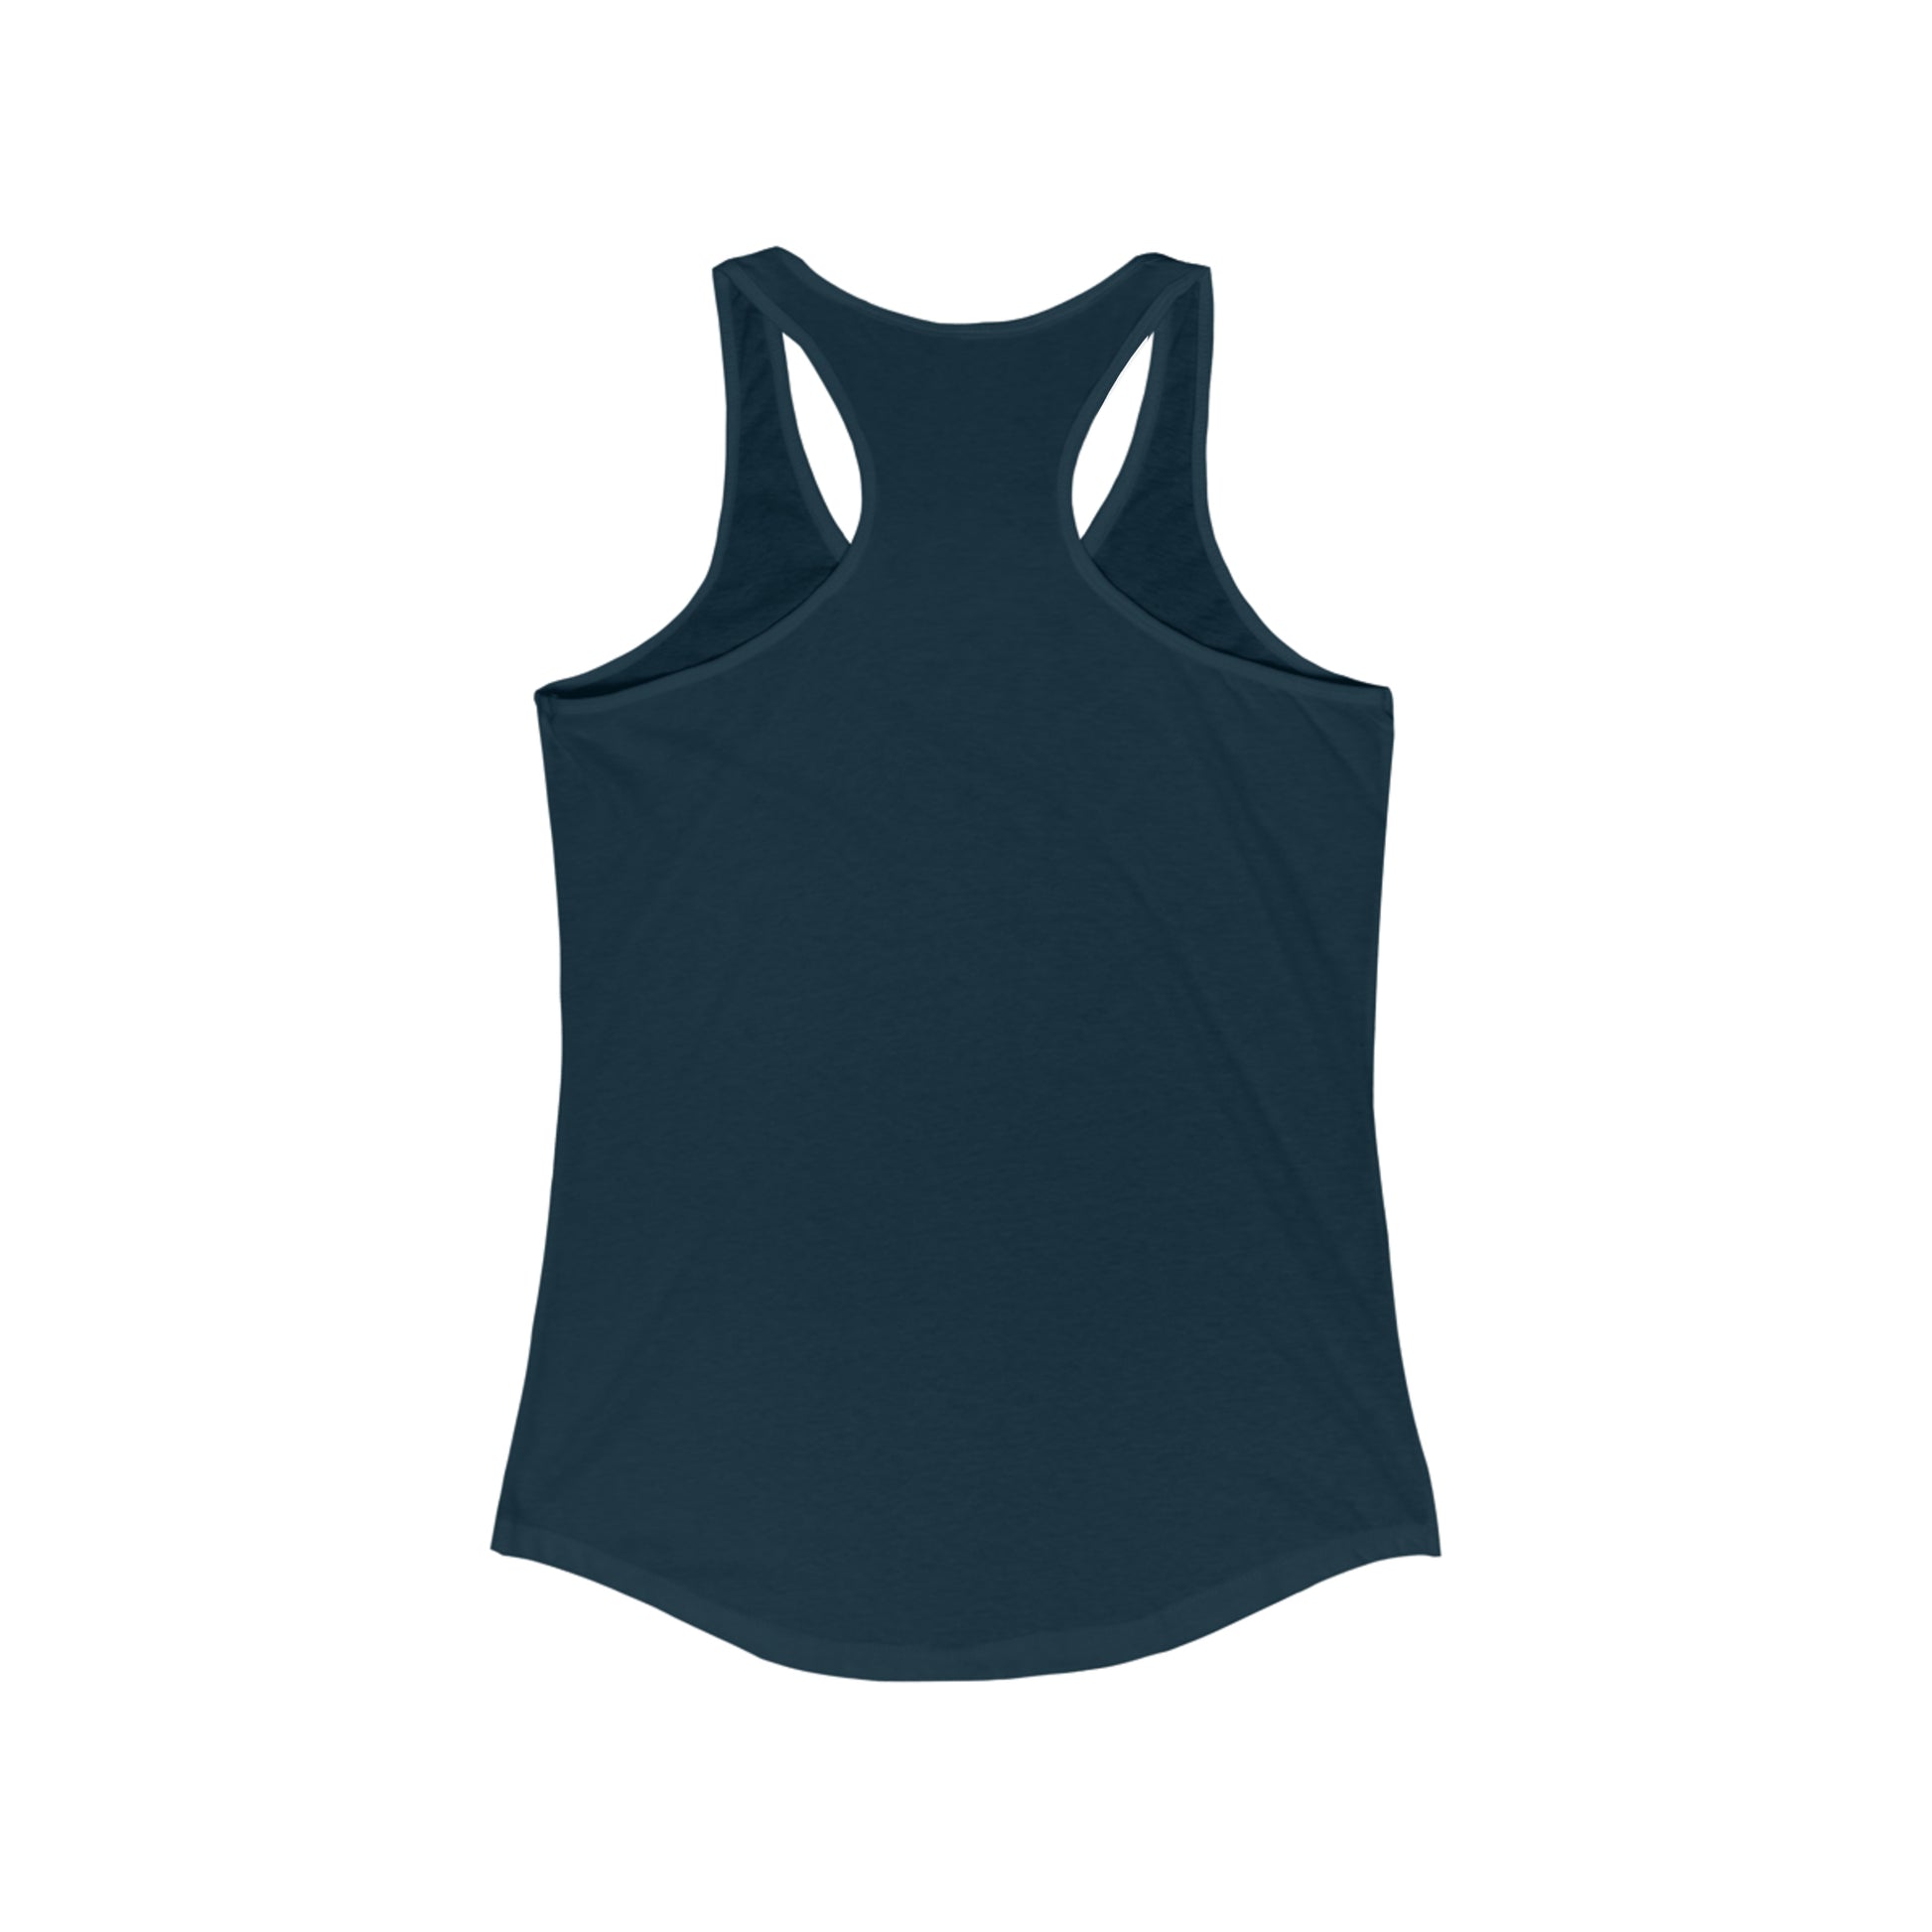 Dark teal Women's Logo Racerback Tank by Printify displayed against a plain white background. The top, inspired by Toronto's Cabbagetown style, features a scoop neck and a slightly curved hem.